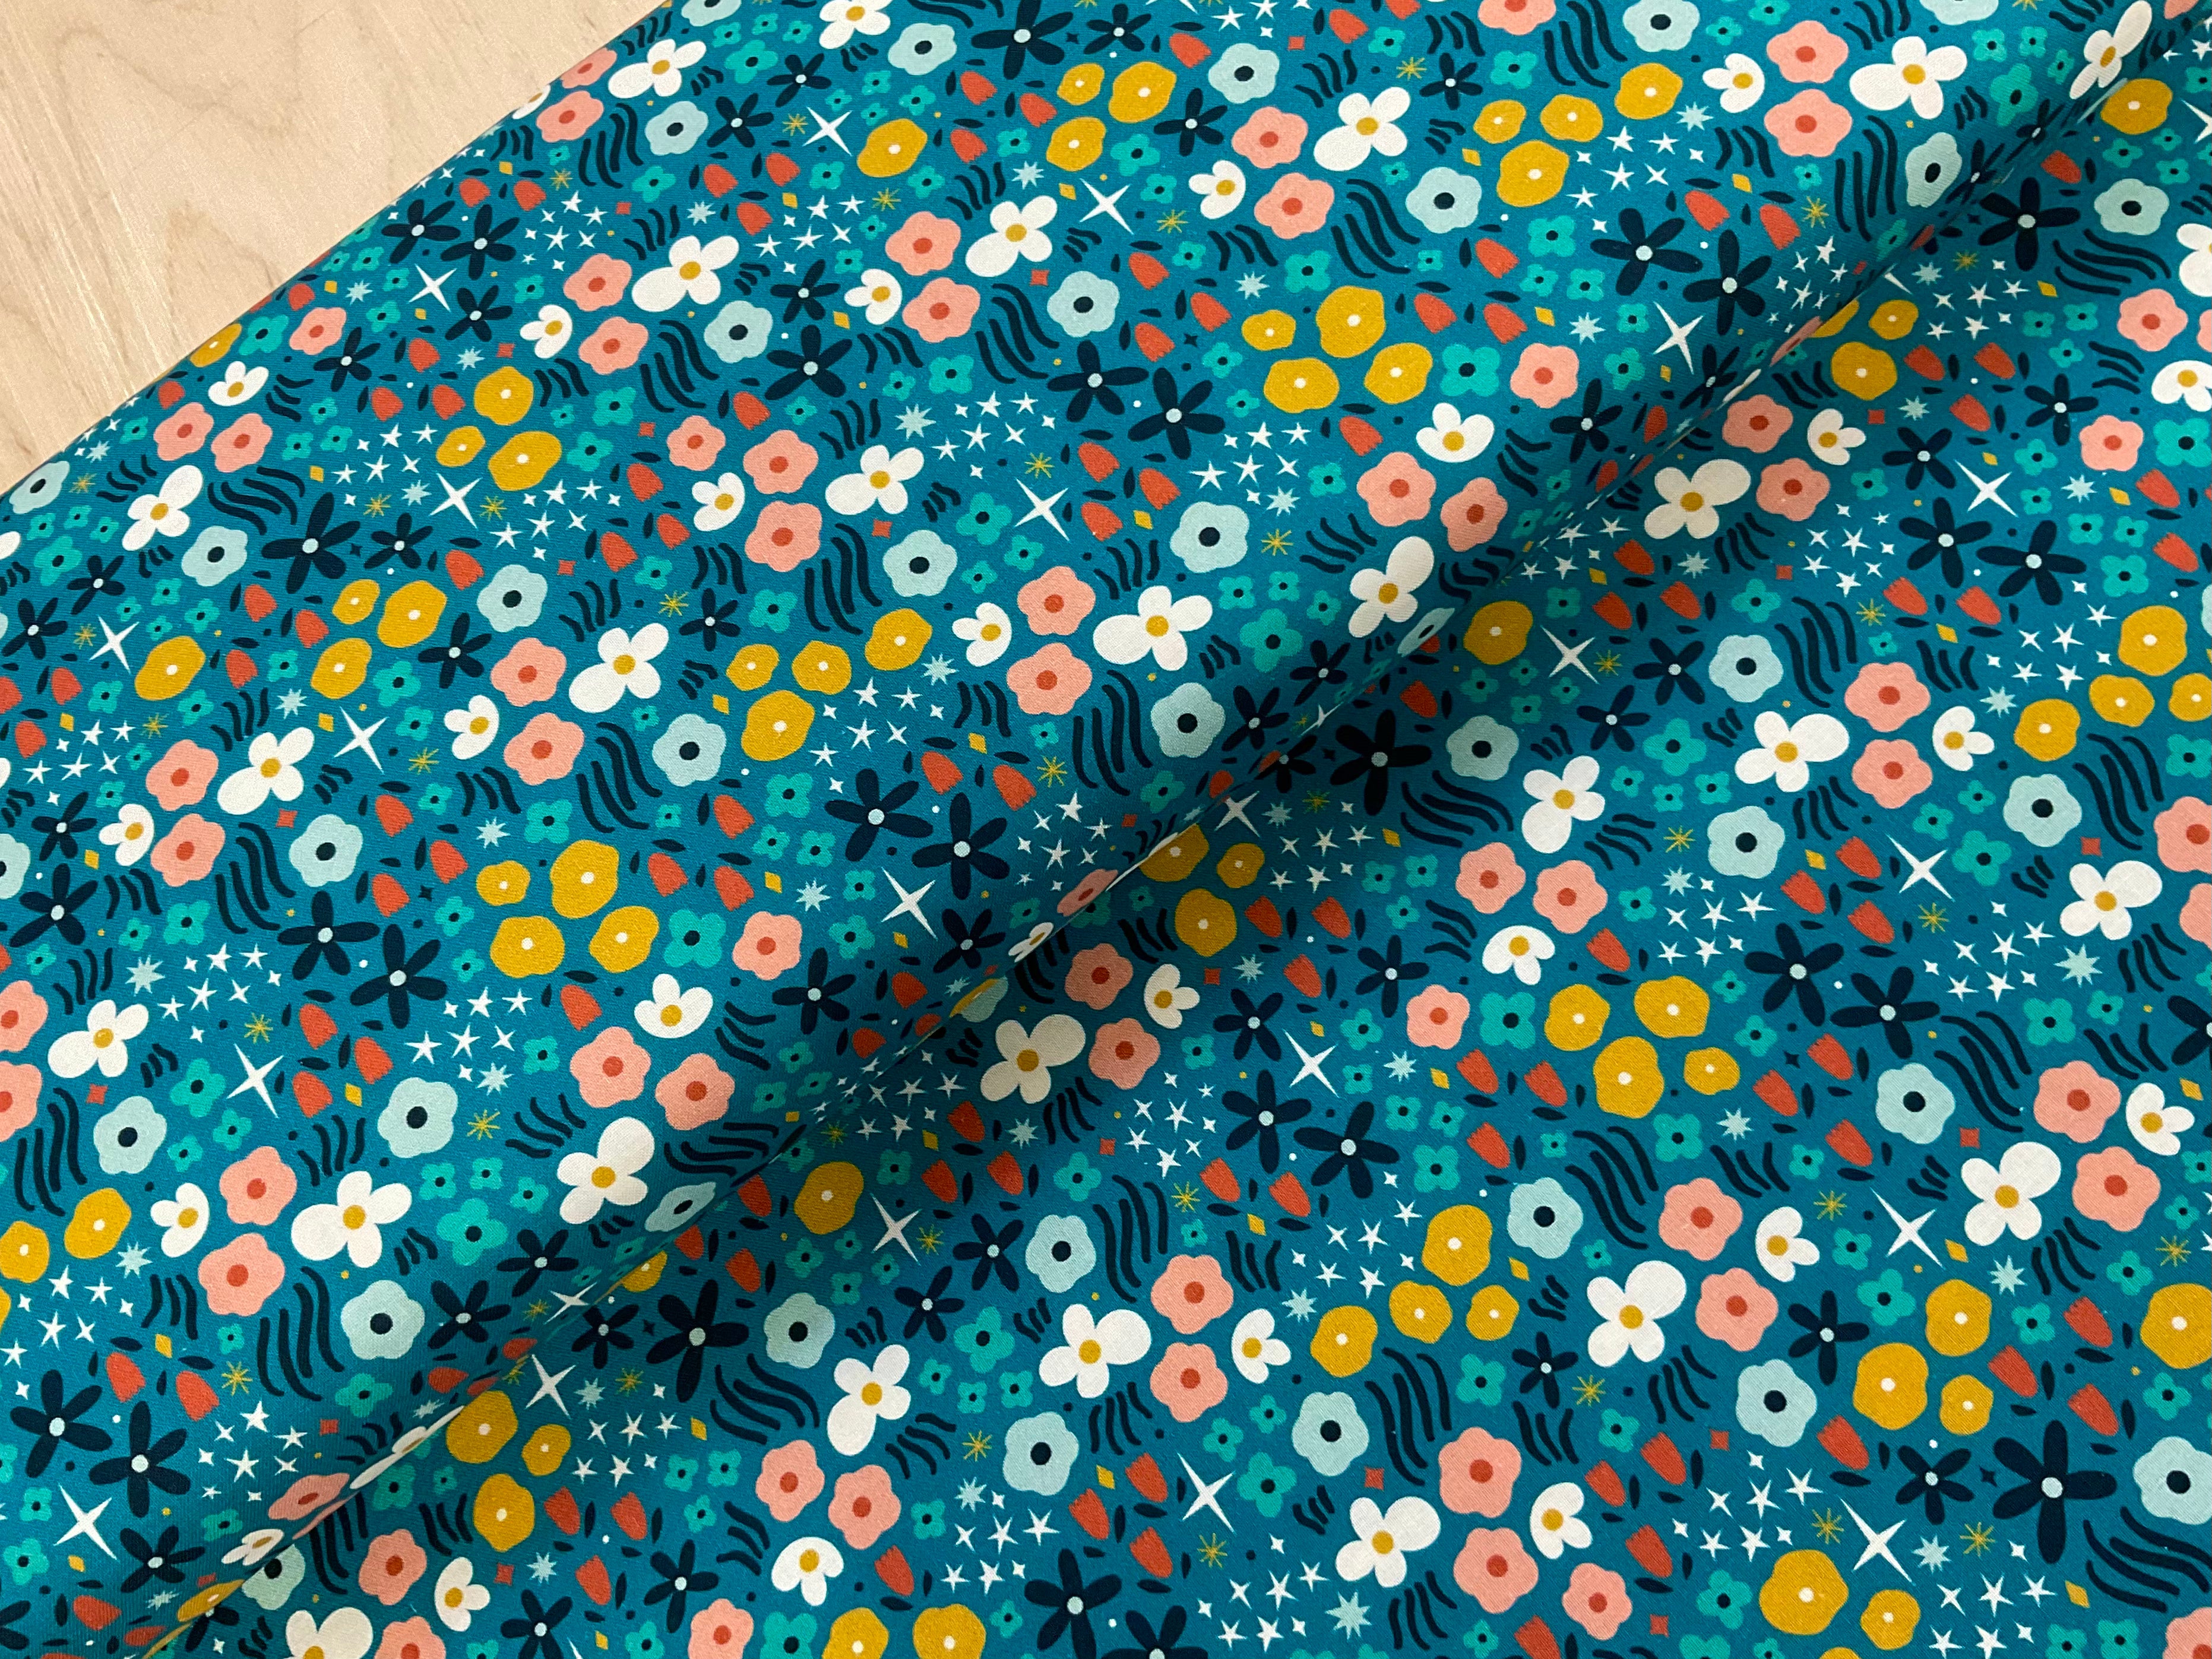 Magical Meadow - Small Flowers on Teal - Dashwood Design Cotton